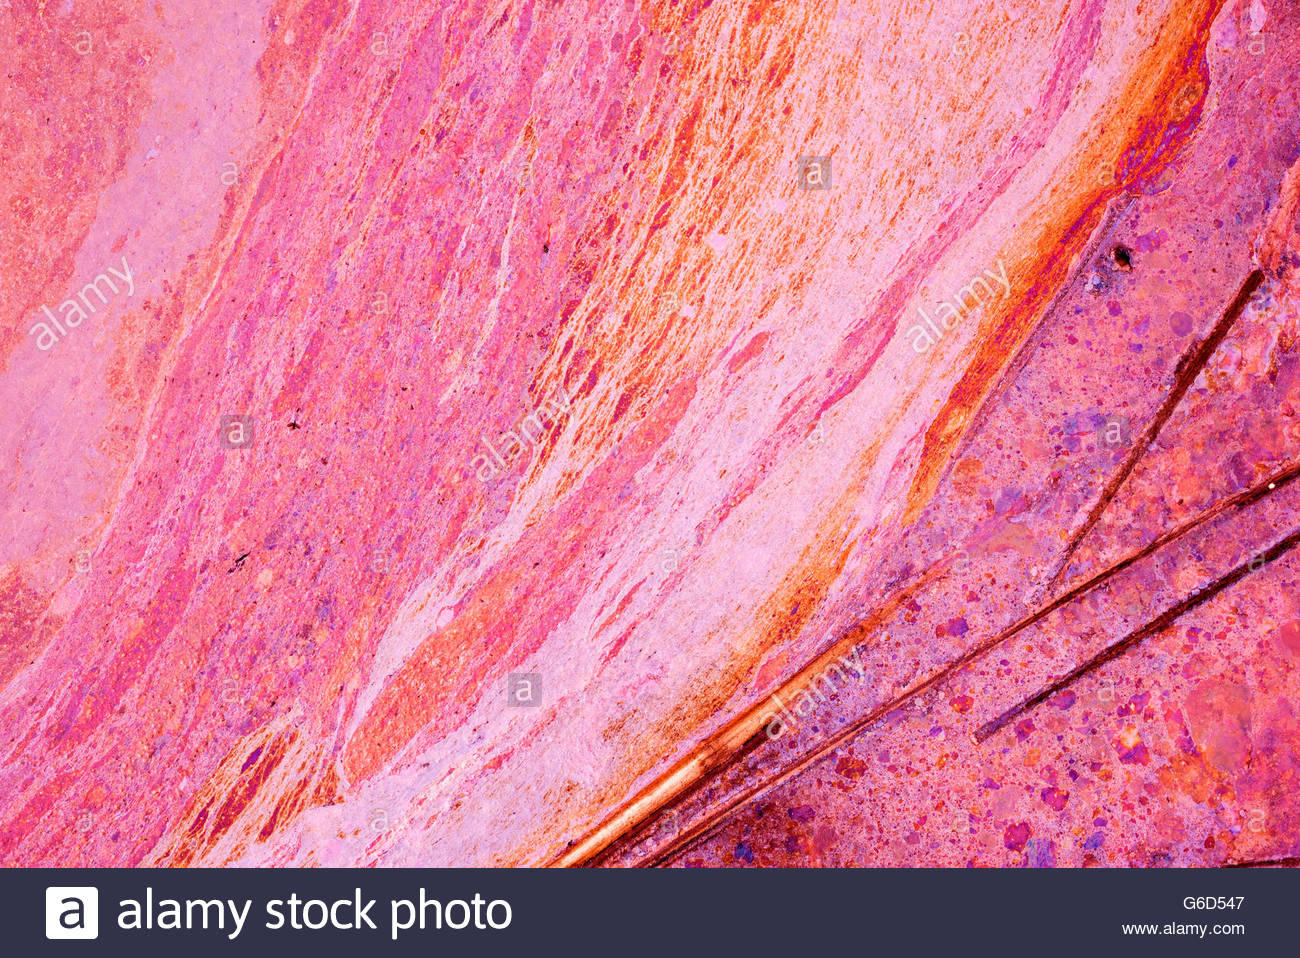 Colorful Liquid Paint Spill Background In High Contrast Pink